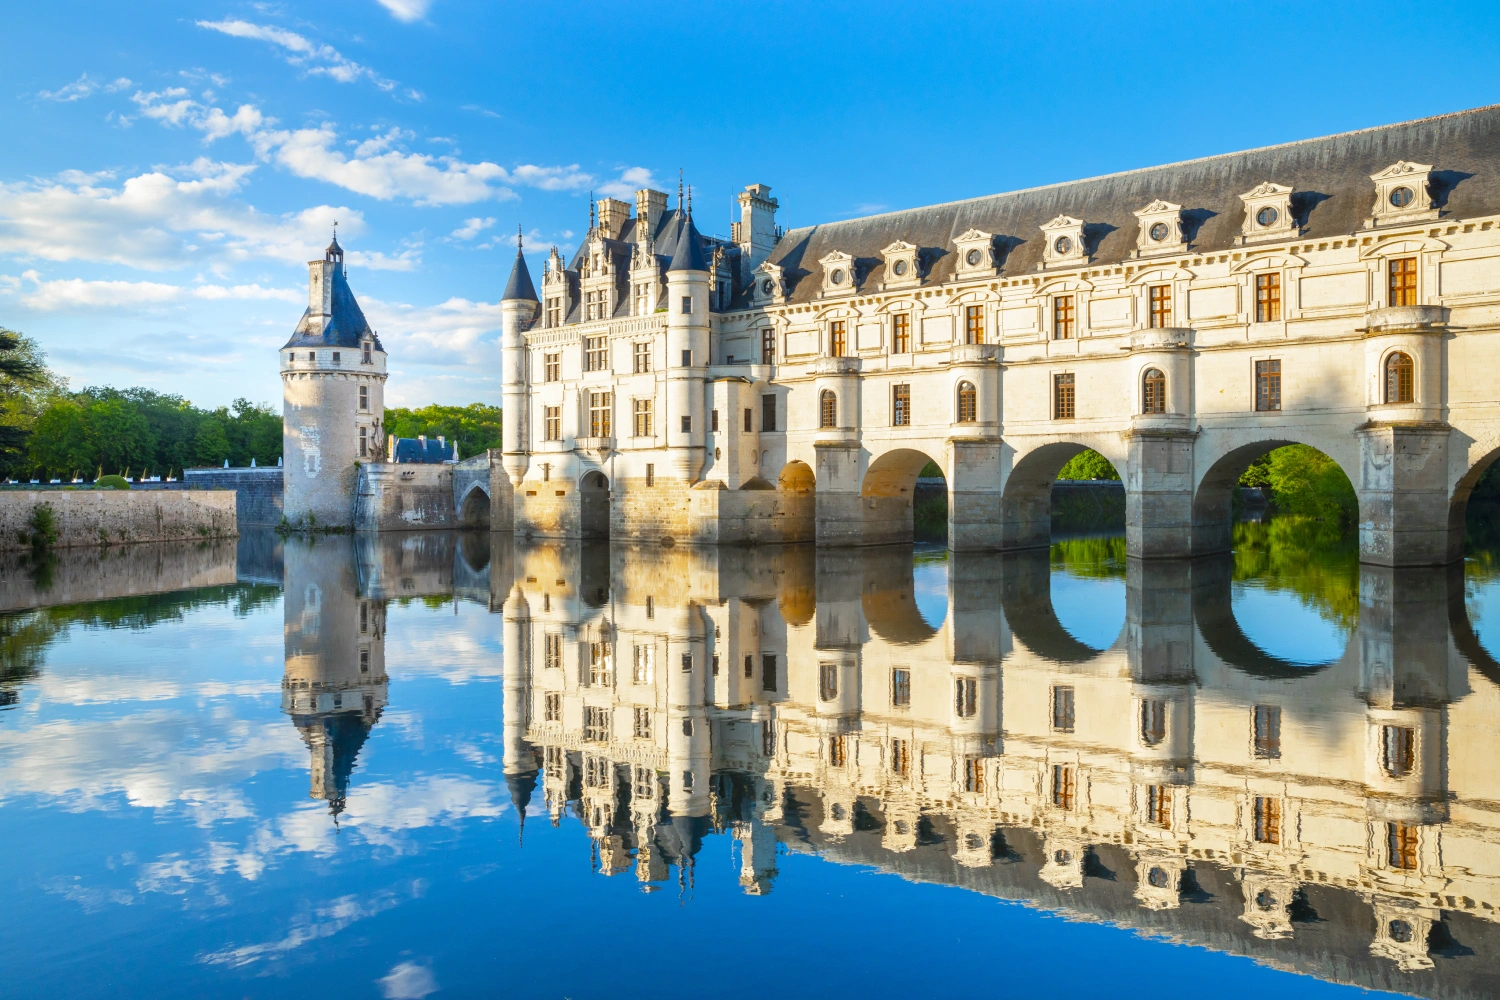 Chateau De Chenonceau in Cher River in France